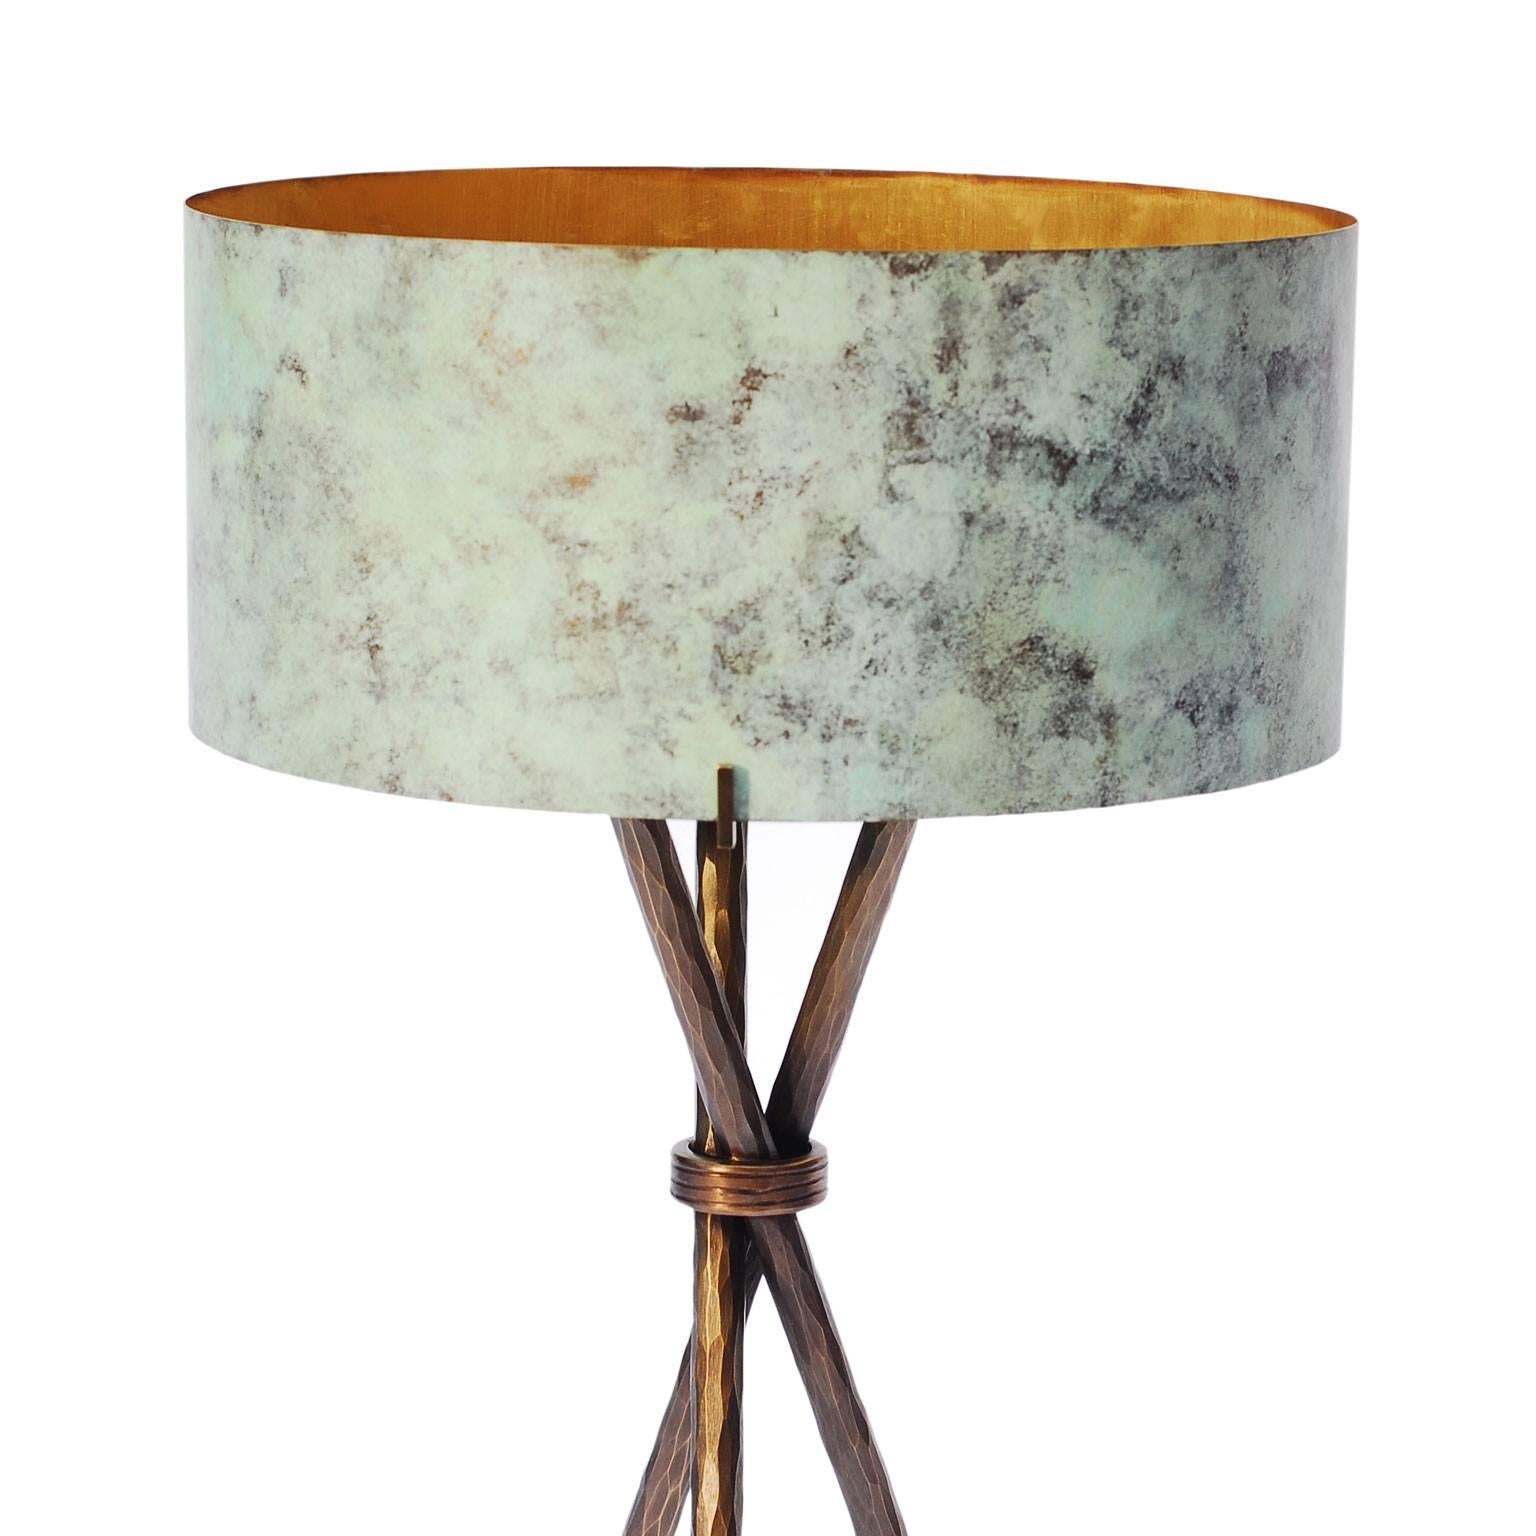 The entirely handmade table lamp has a hand-forged textured and patinated bronze base. The shade, as well, is in green patinated bronze.
 